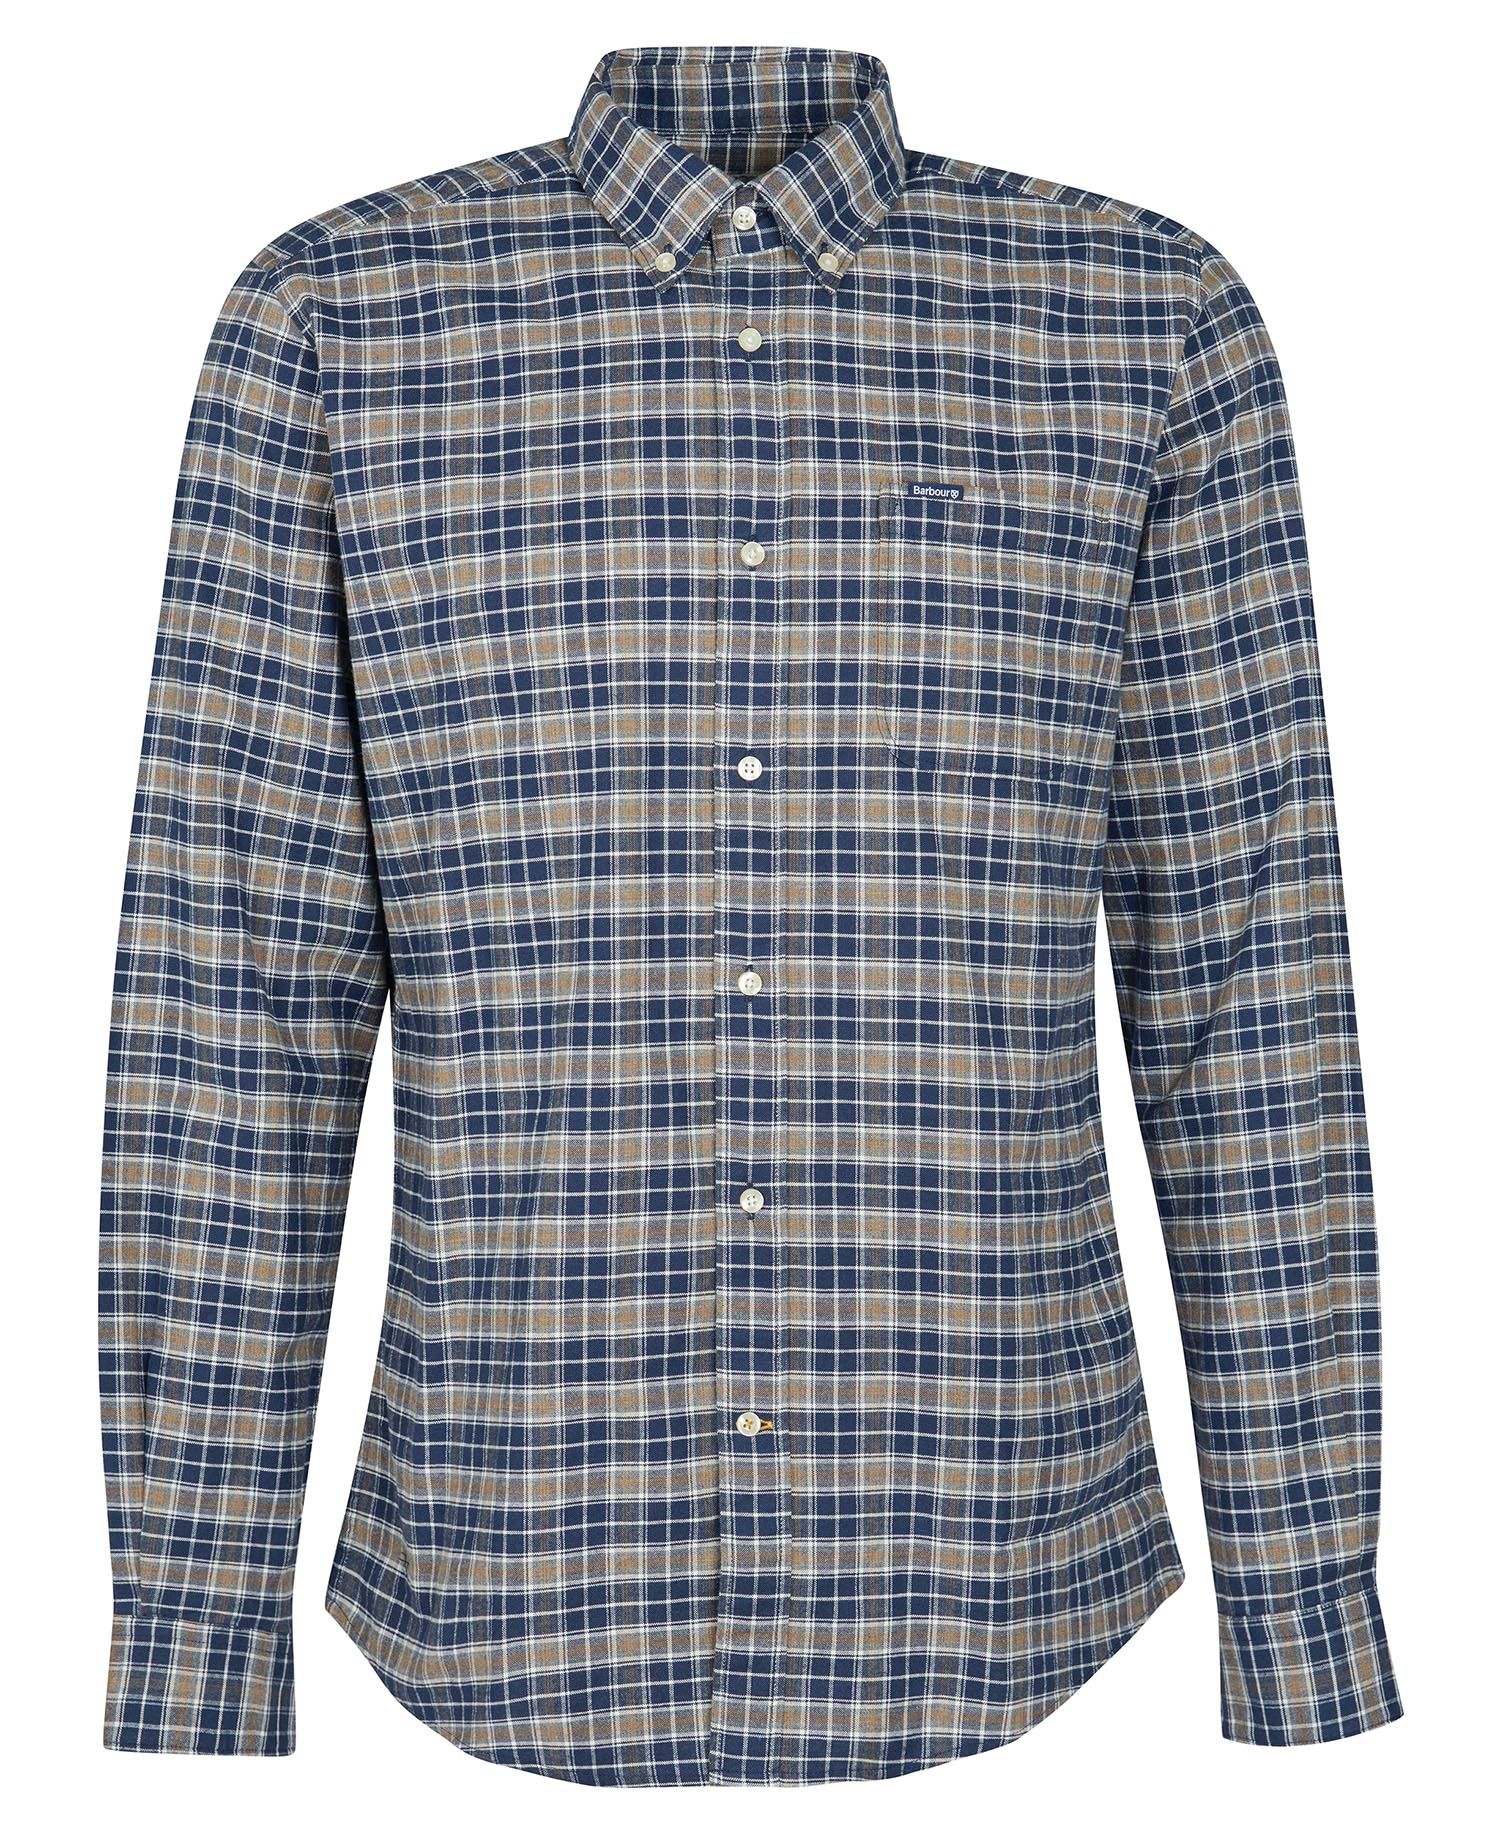 Barbour Benwell Tailored Fit Shirt